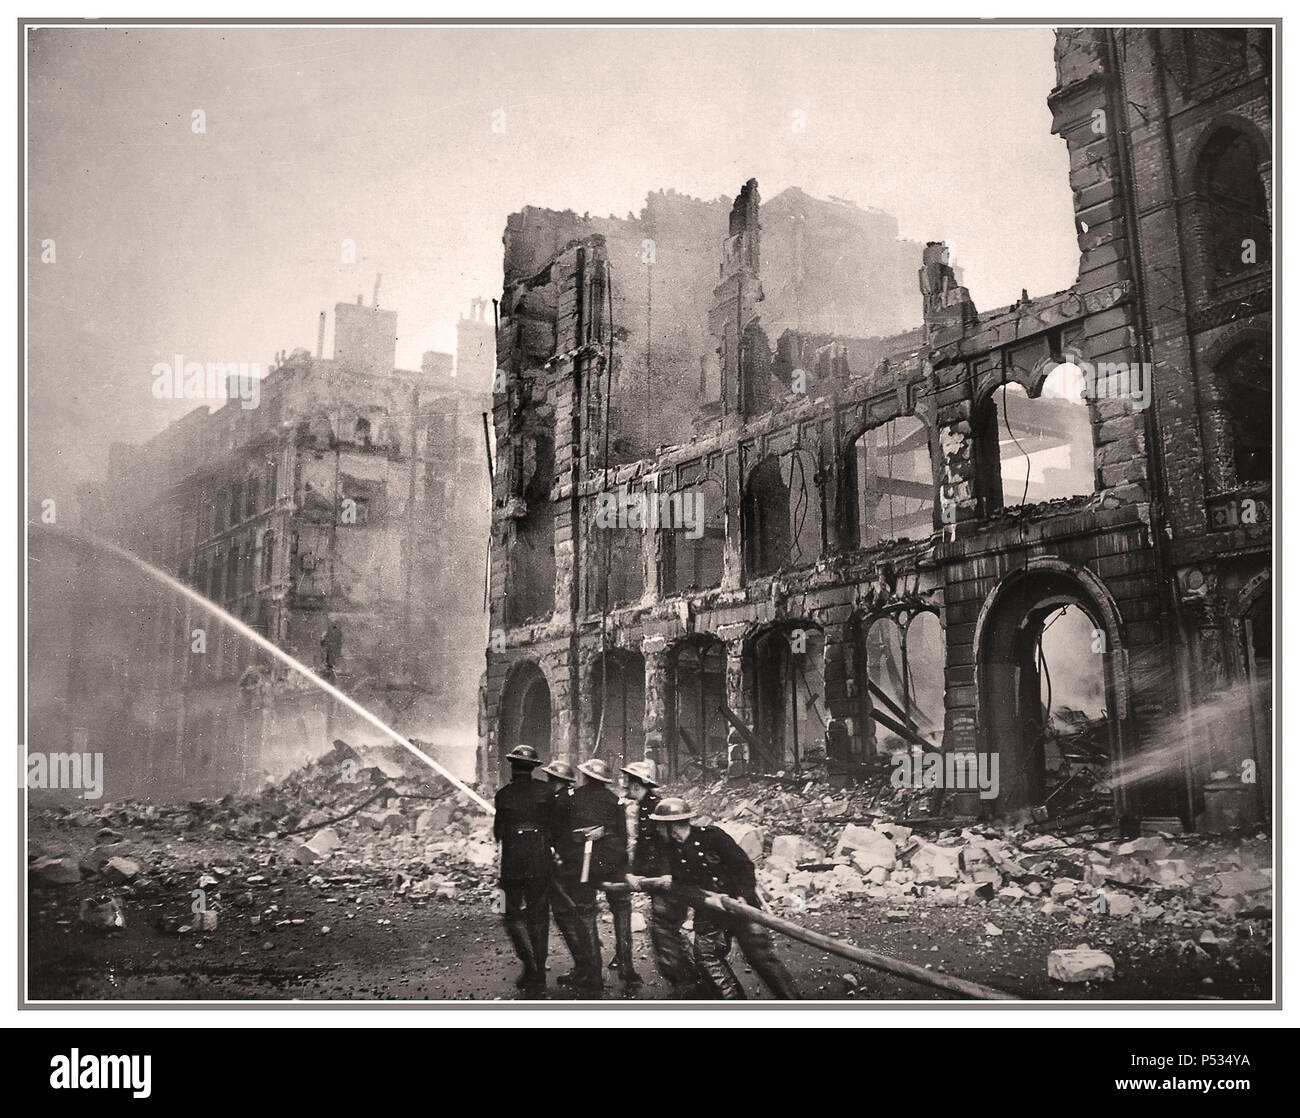 1940 London Firemen WW2 Blitz Bombing City Centre brave courageous British Fireman Firemen Firefighters with hose fighting fires and damping down after a Nazi Germany terror bombing raid. Central London City buildings in ruins with danger of imminent collapse London UK Stock Photo